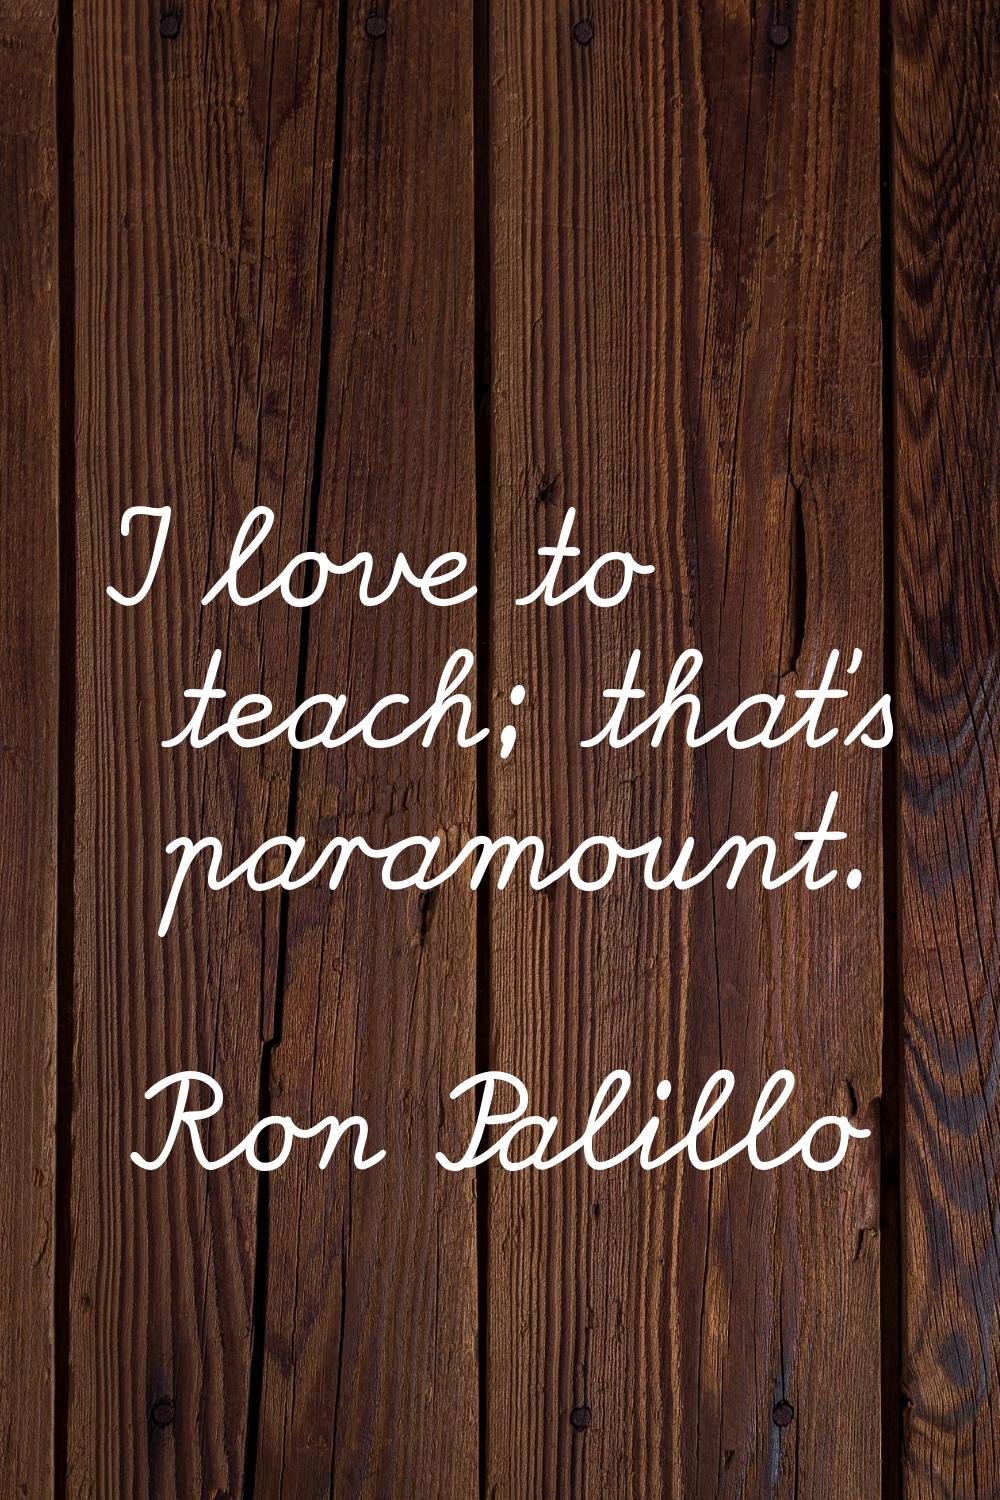 I love to teach; that's paramount.